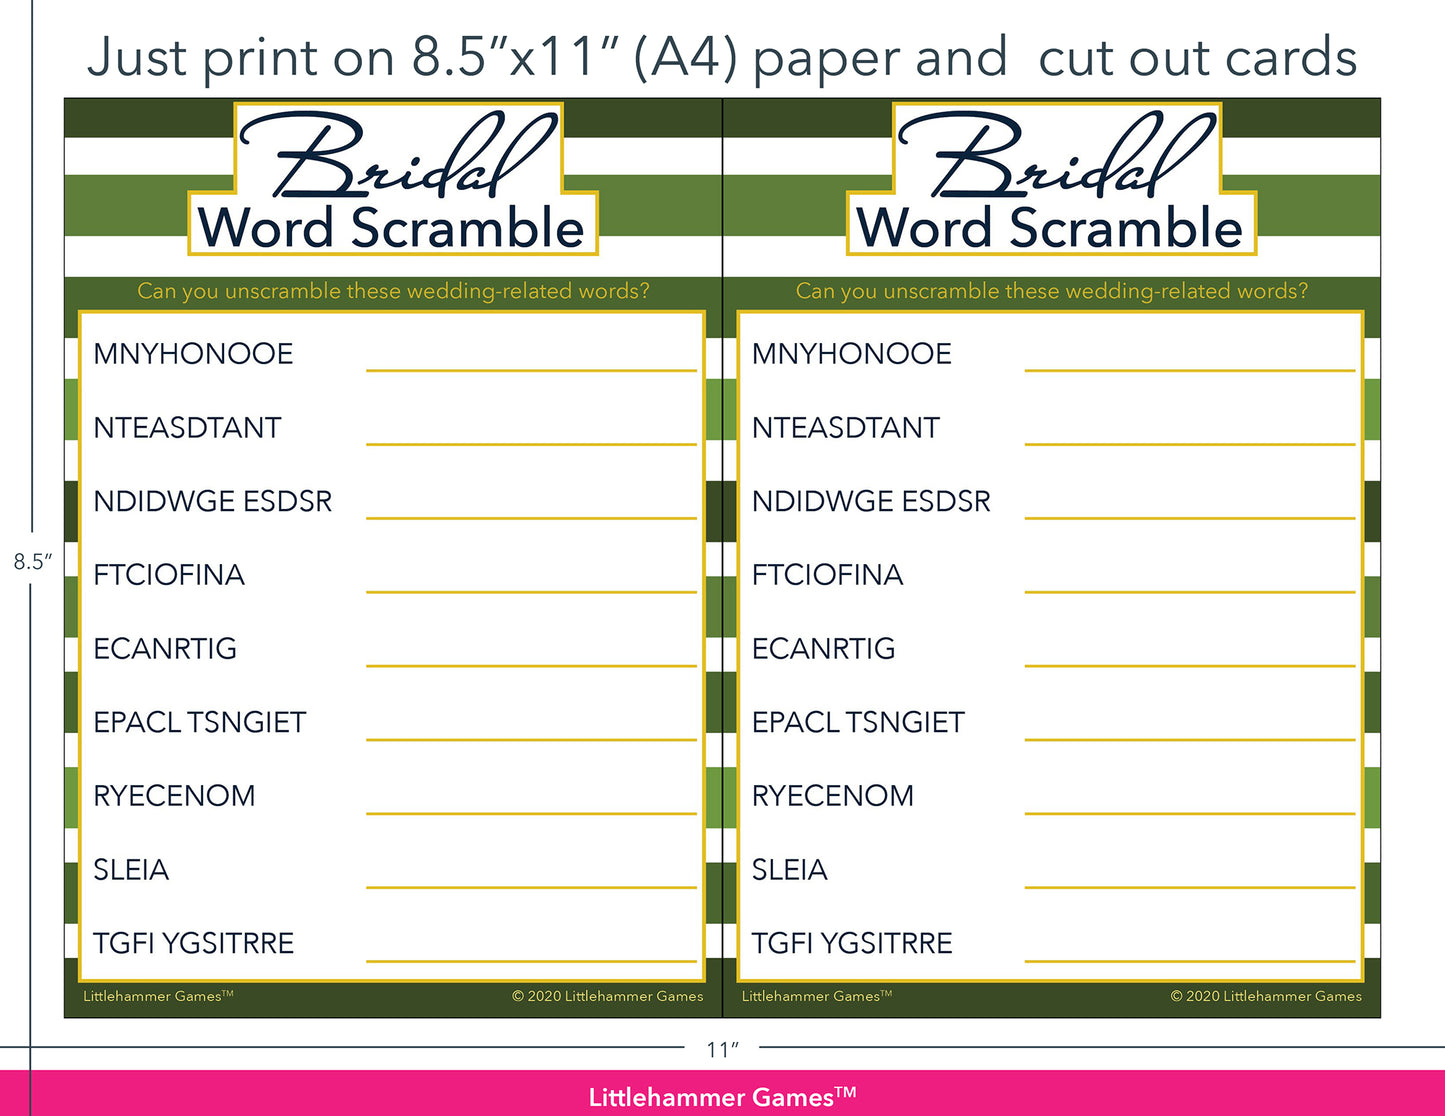 Bridal Word Scramble green-striped game cards with printing instructions